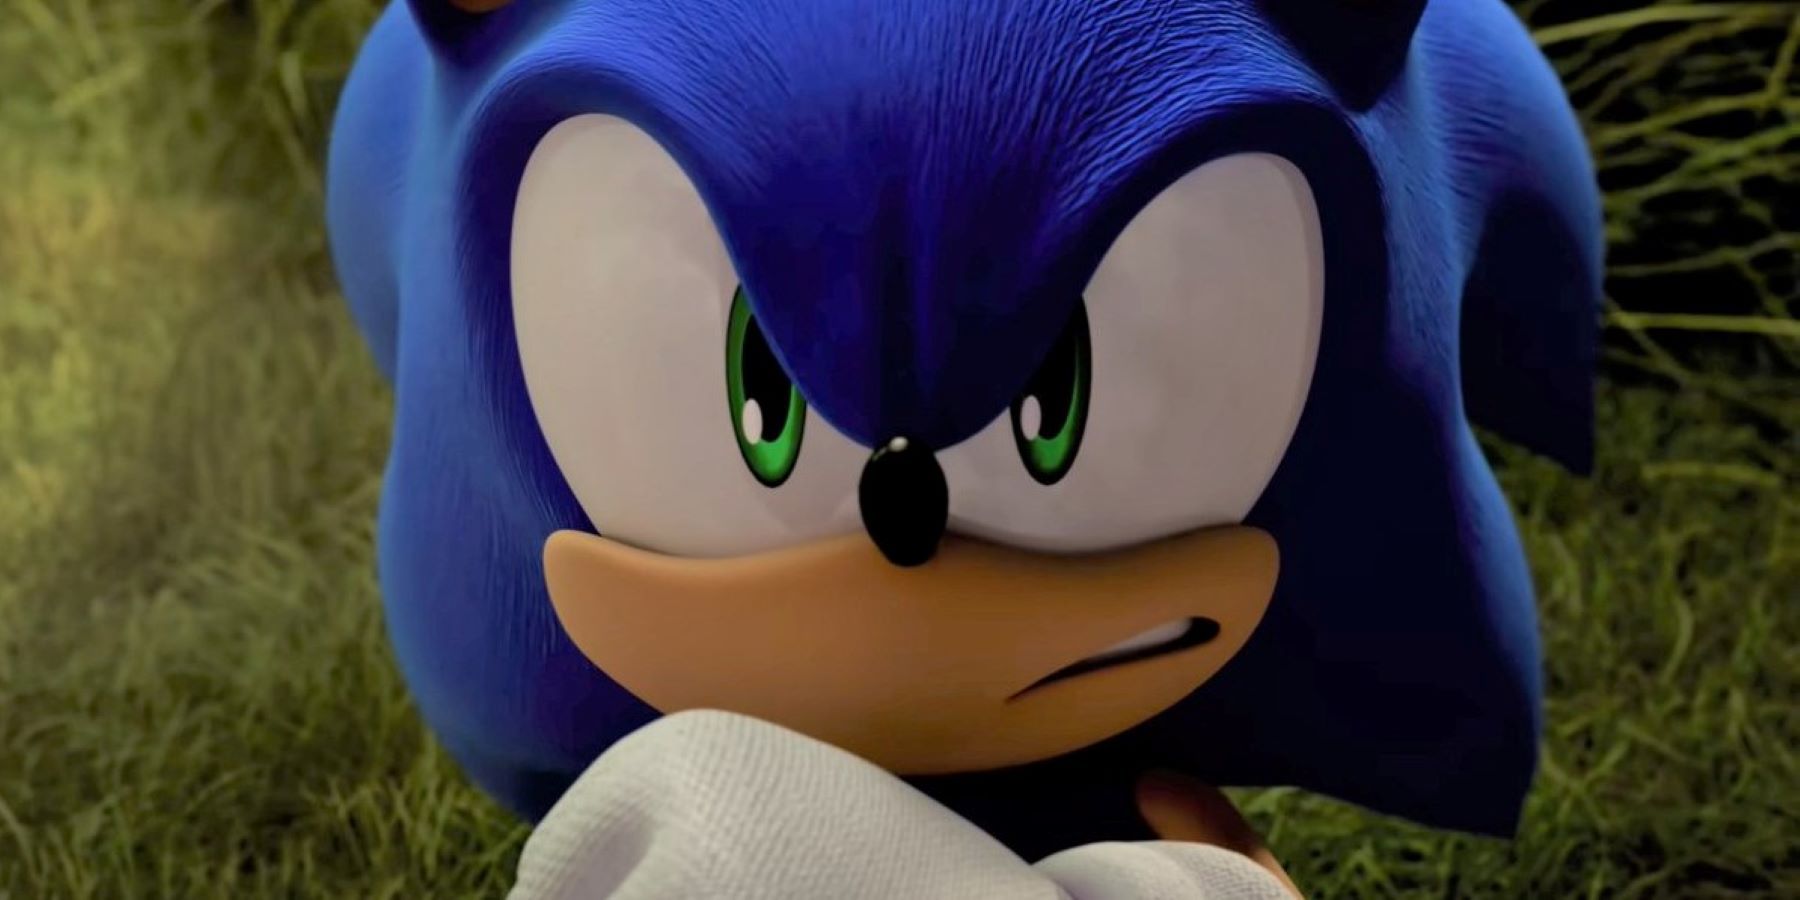 Sonic gritting his teeth and raising a fist defensively in the Sonic Frontiers reveal trailer